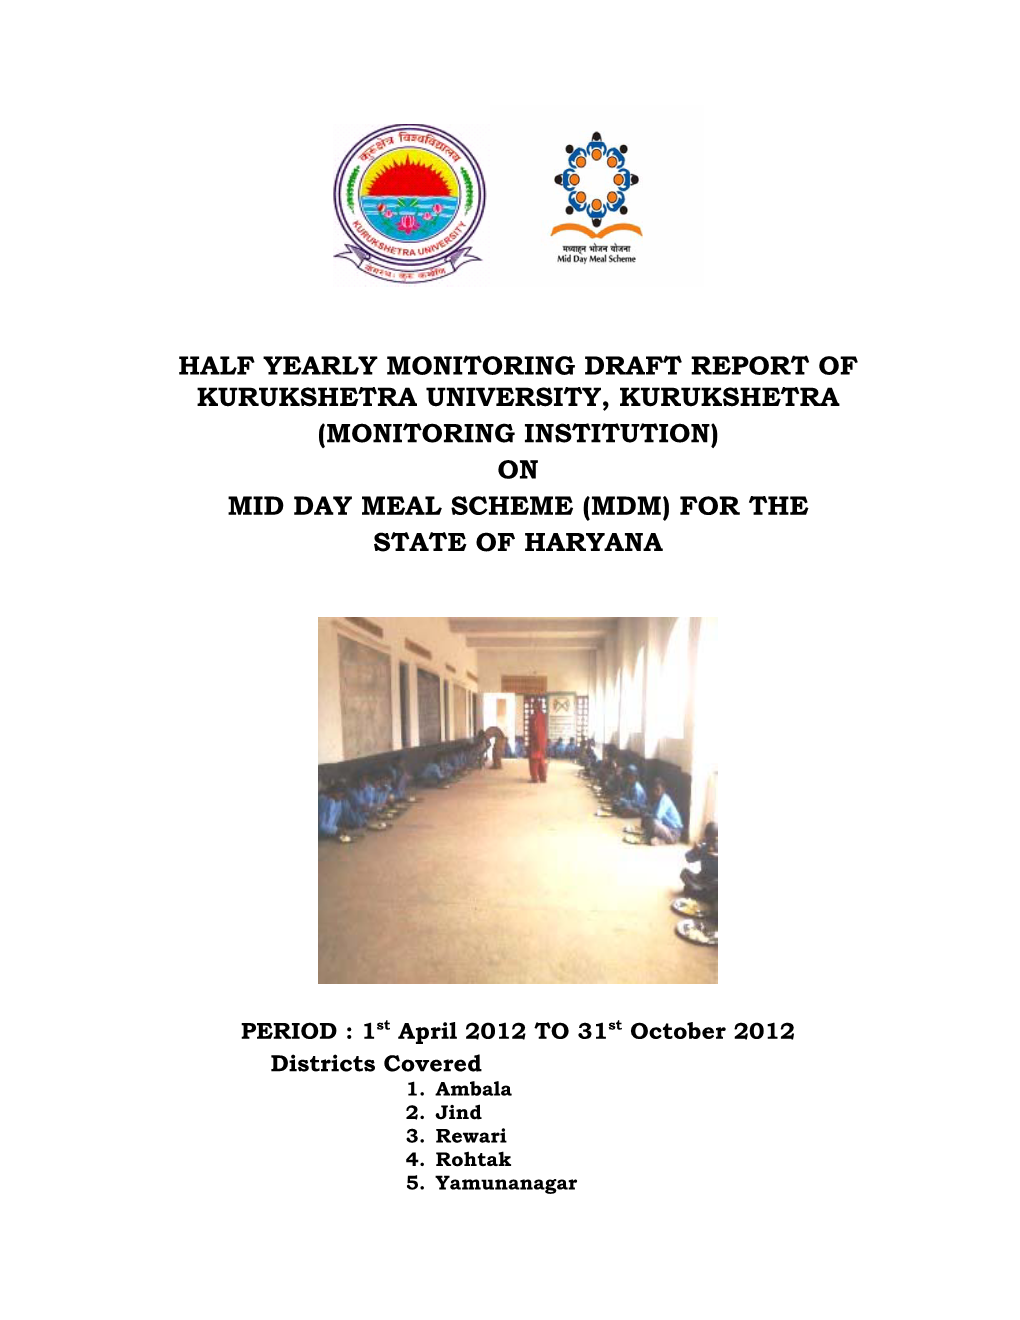 Half Yearly Monitoring Draft Report of Kurukshetra University, Kurukshetra (Monitoring Institution) on Mid Day Meal Scheme (Mdm) for the State of Haryana